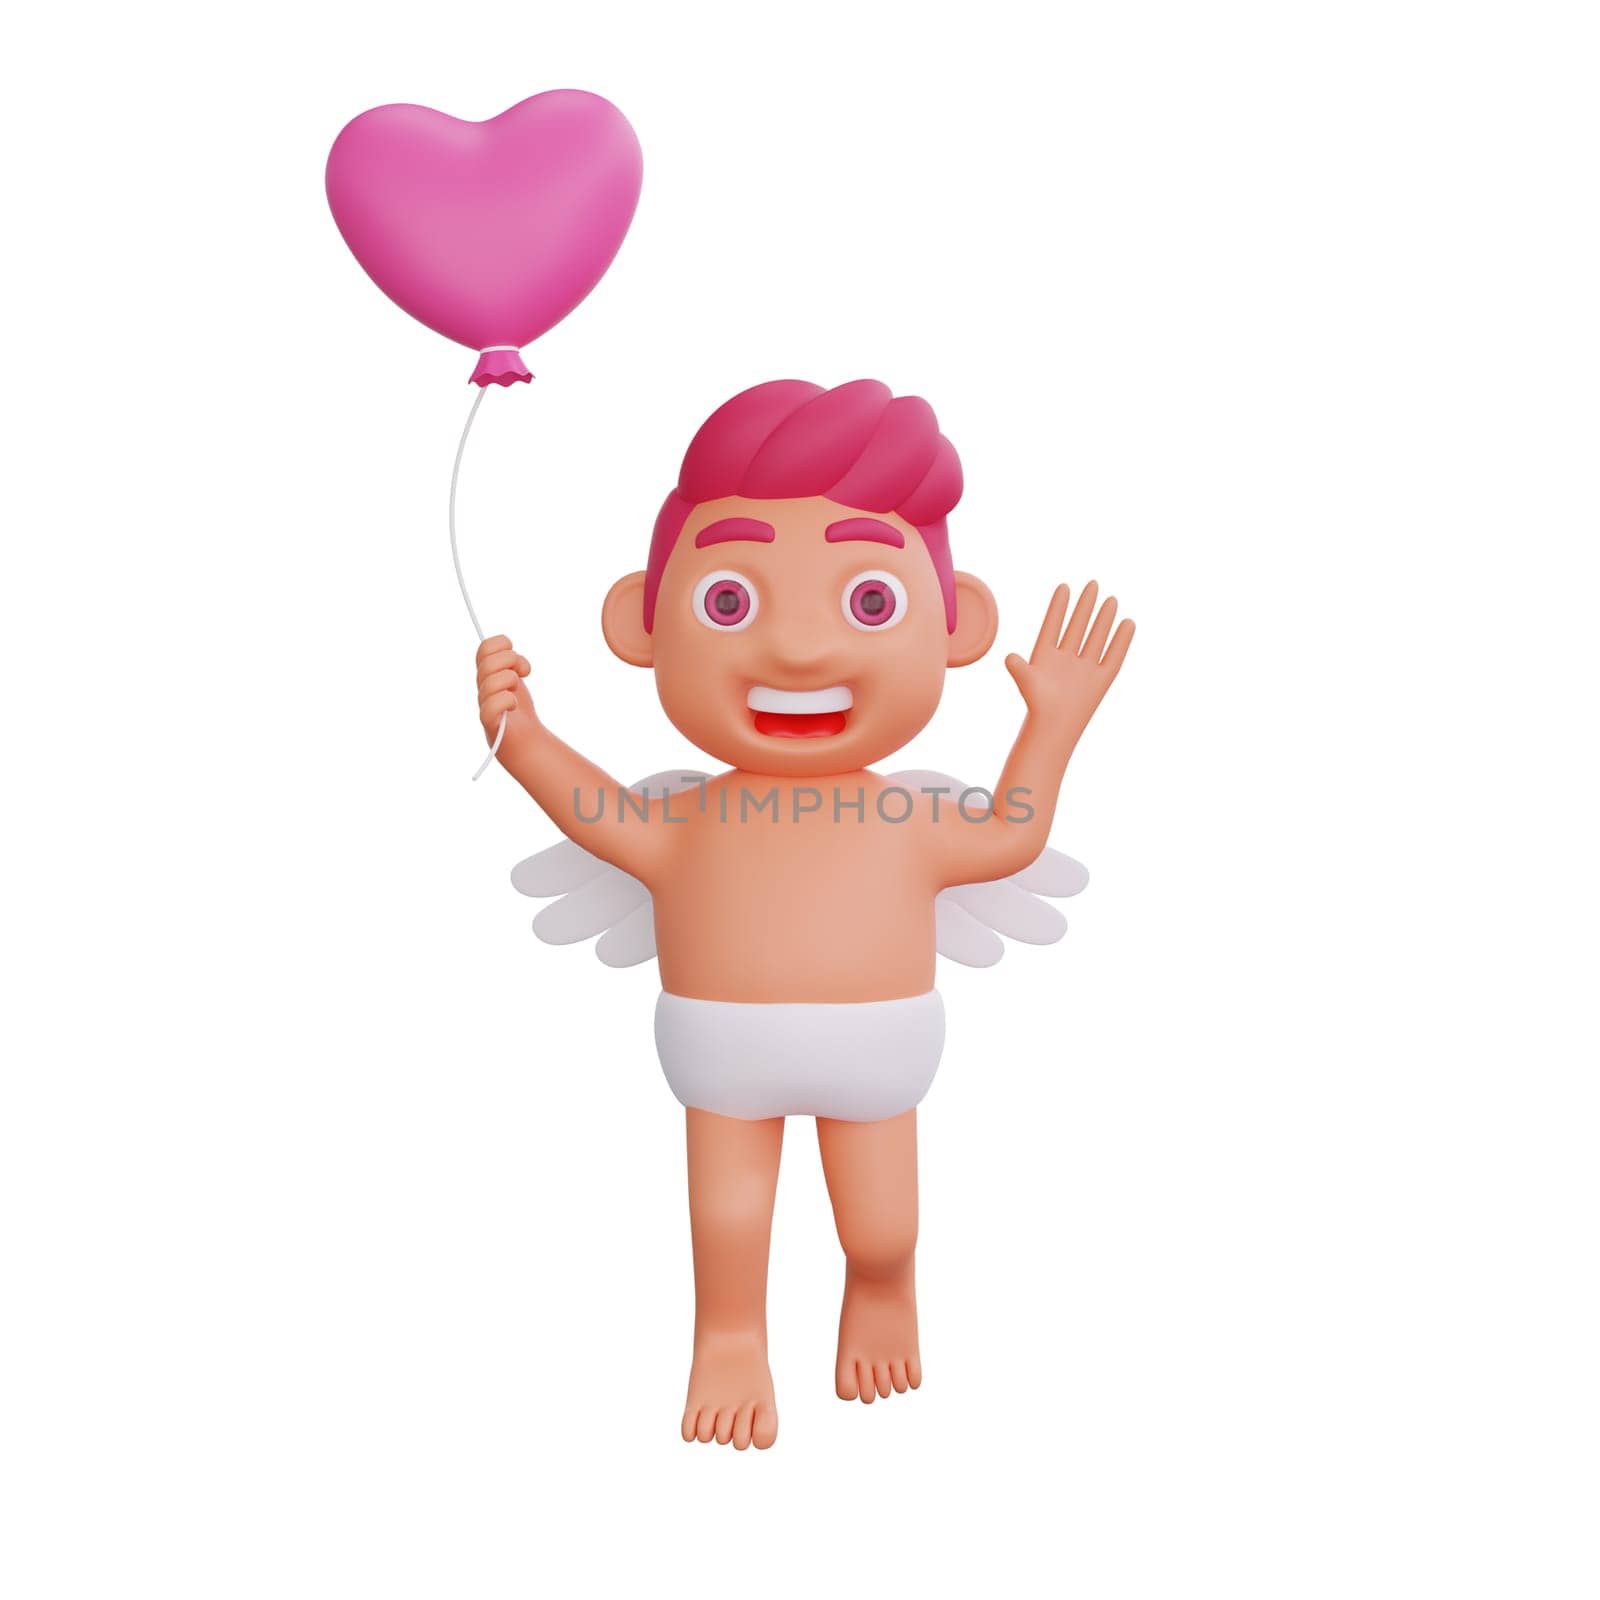 3D illustration of Valentine Cupid character joyfully holds a heart-shaped balloon, perfect for Valentine or love themed projects